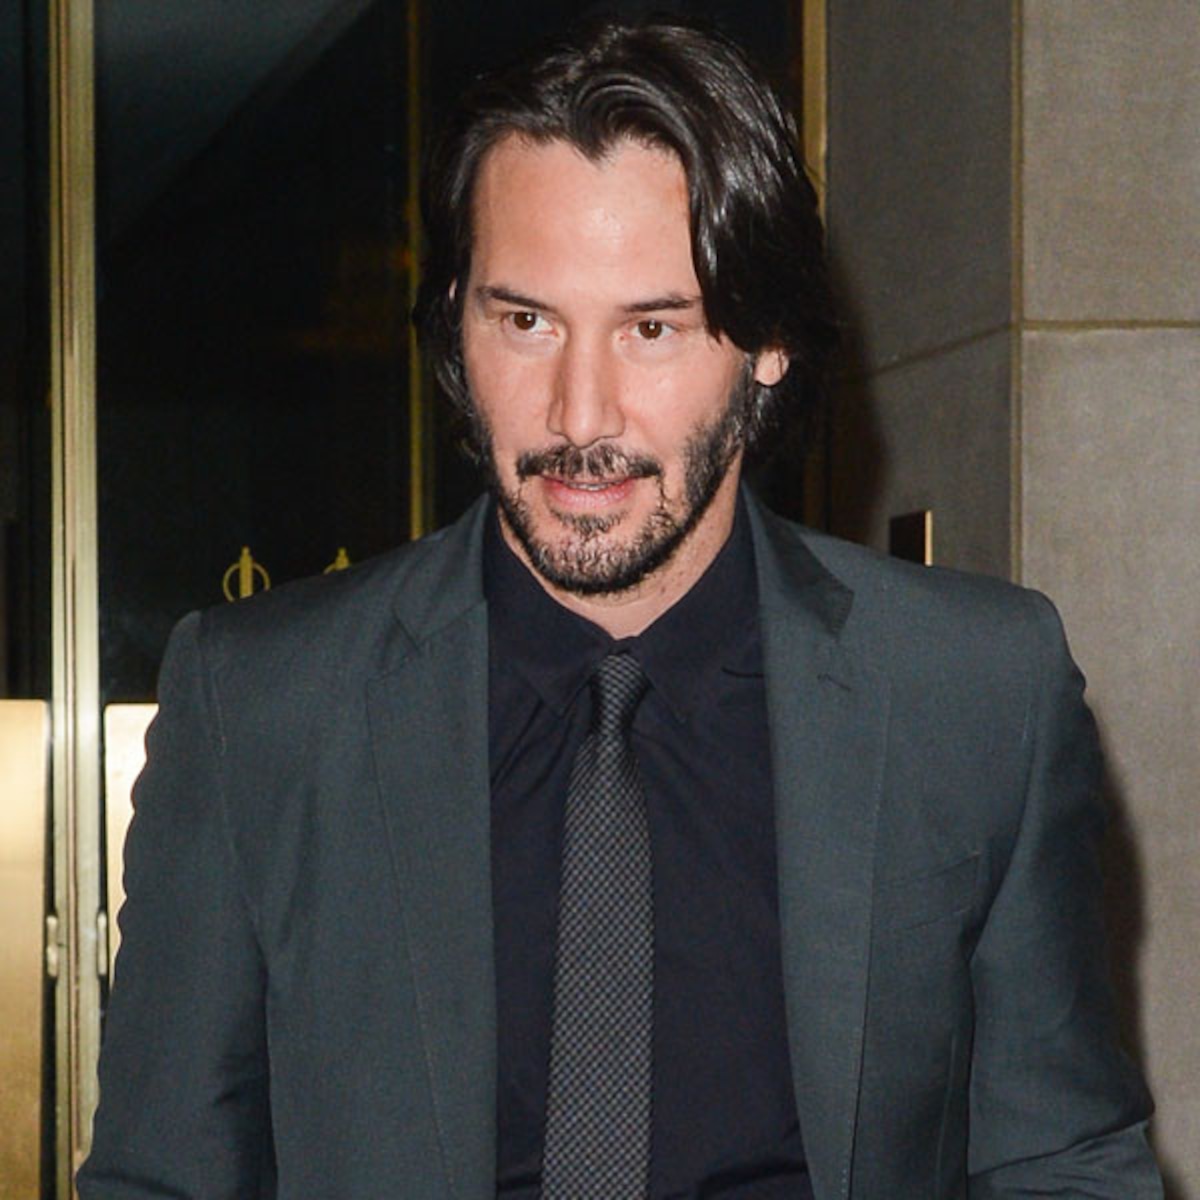 Actor Keanu Reeves 'mistakenly visited by police conducting a welfare check' on an unidentified woman in Los Angeles